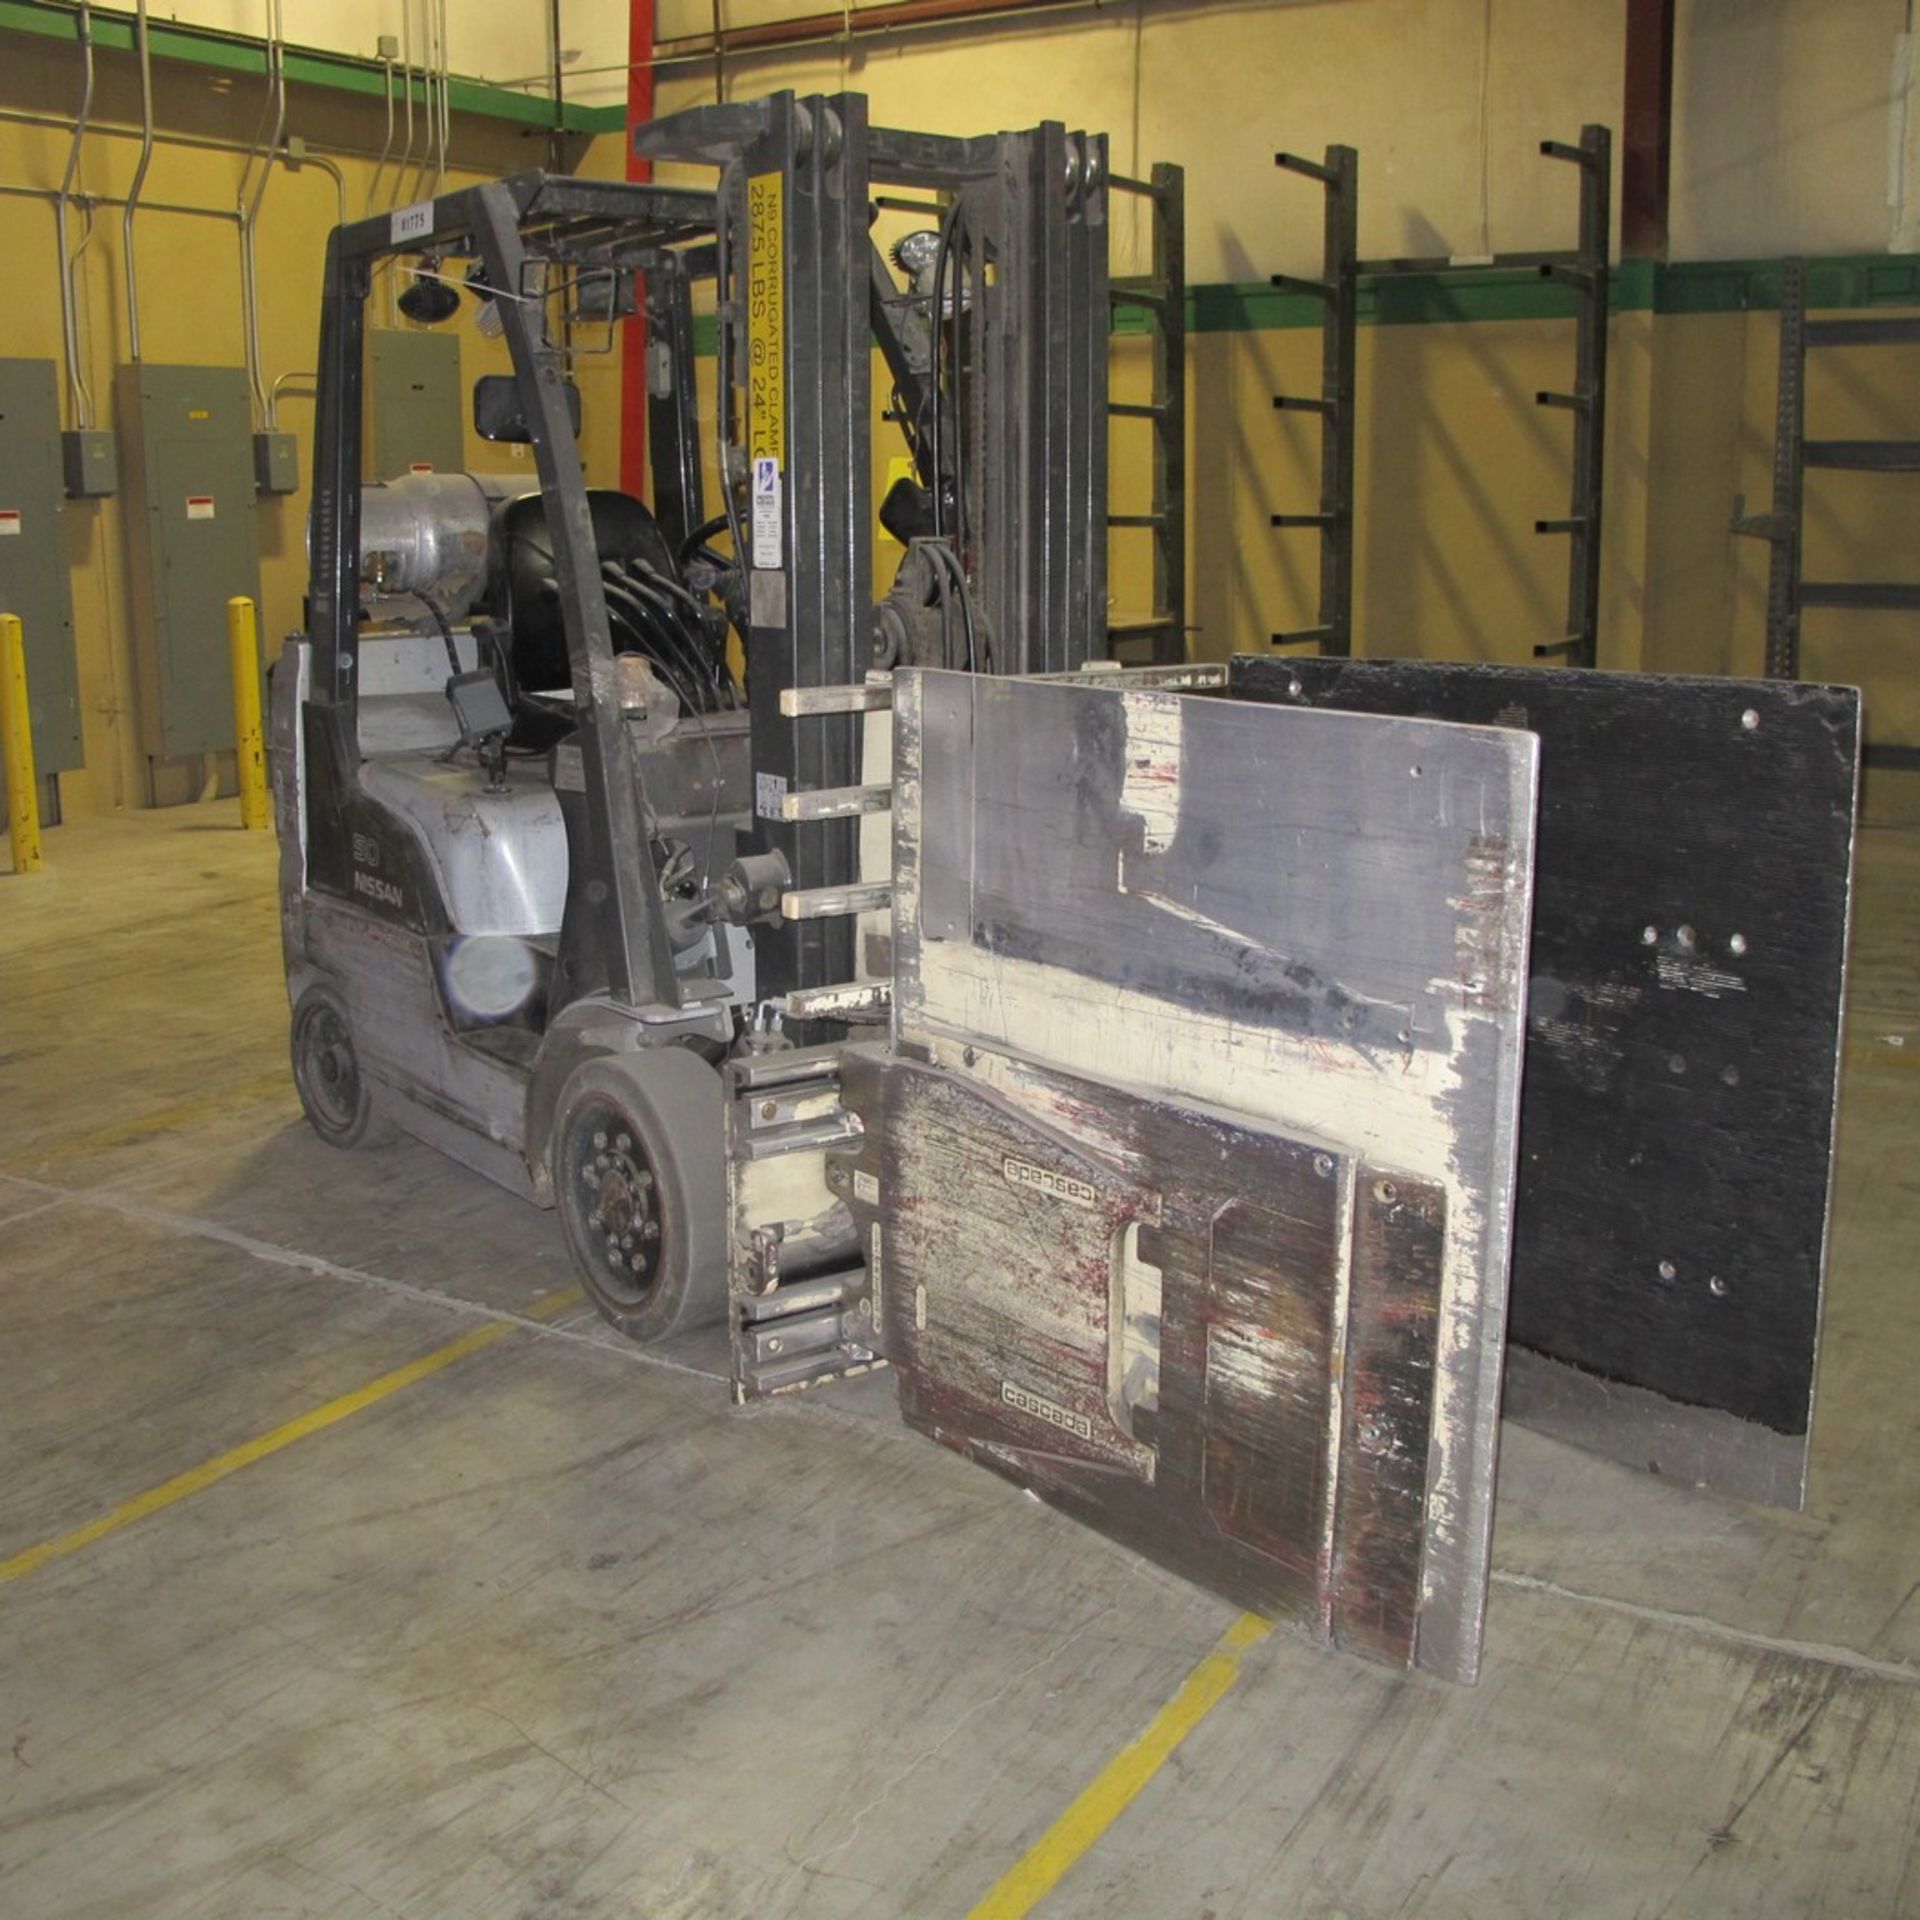 NISSAN 50MCU1F2A25LV PROPANE FORKLIFT W/ CASCADE HYDRAULIC CLAMP ATATCHMENT (SOUTHEAST PLANT) - Image 4 of 11